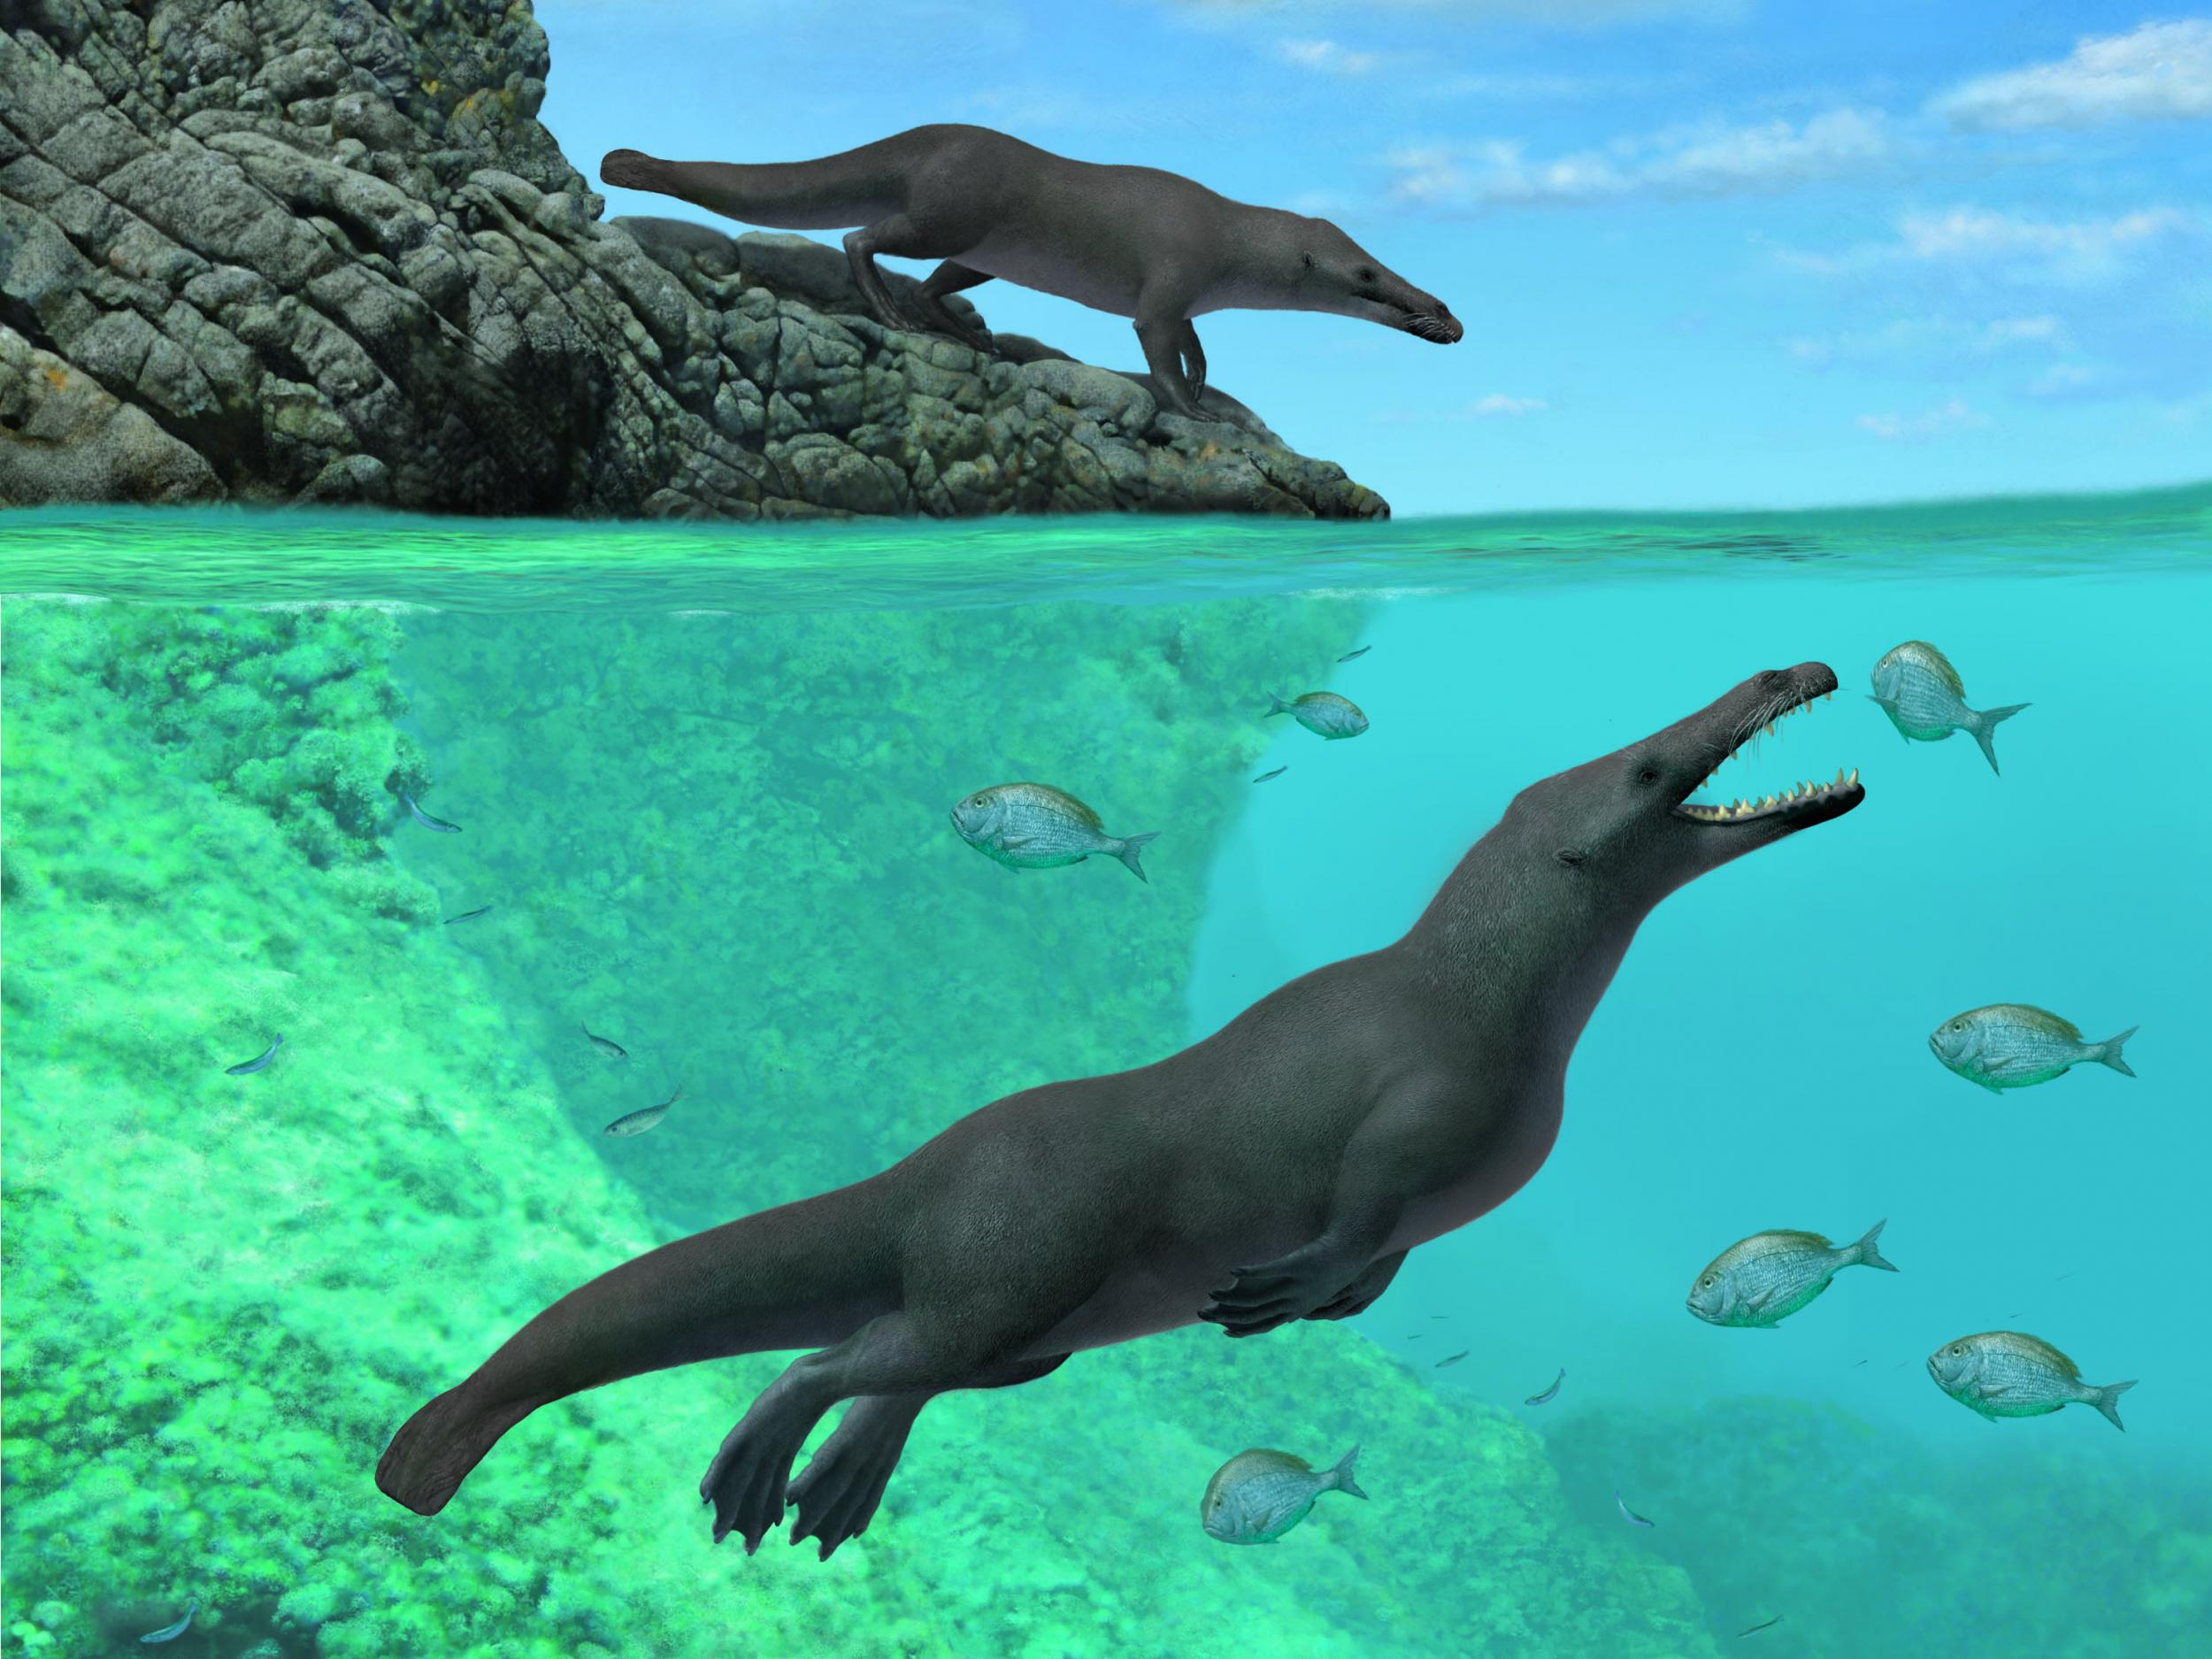 Scientists think the newly discovered Peregocetus was able to walk on land and swim